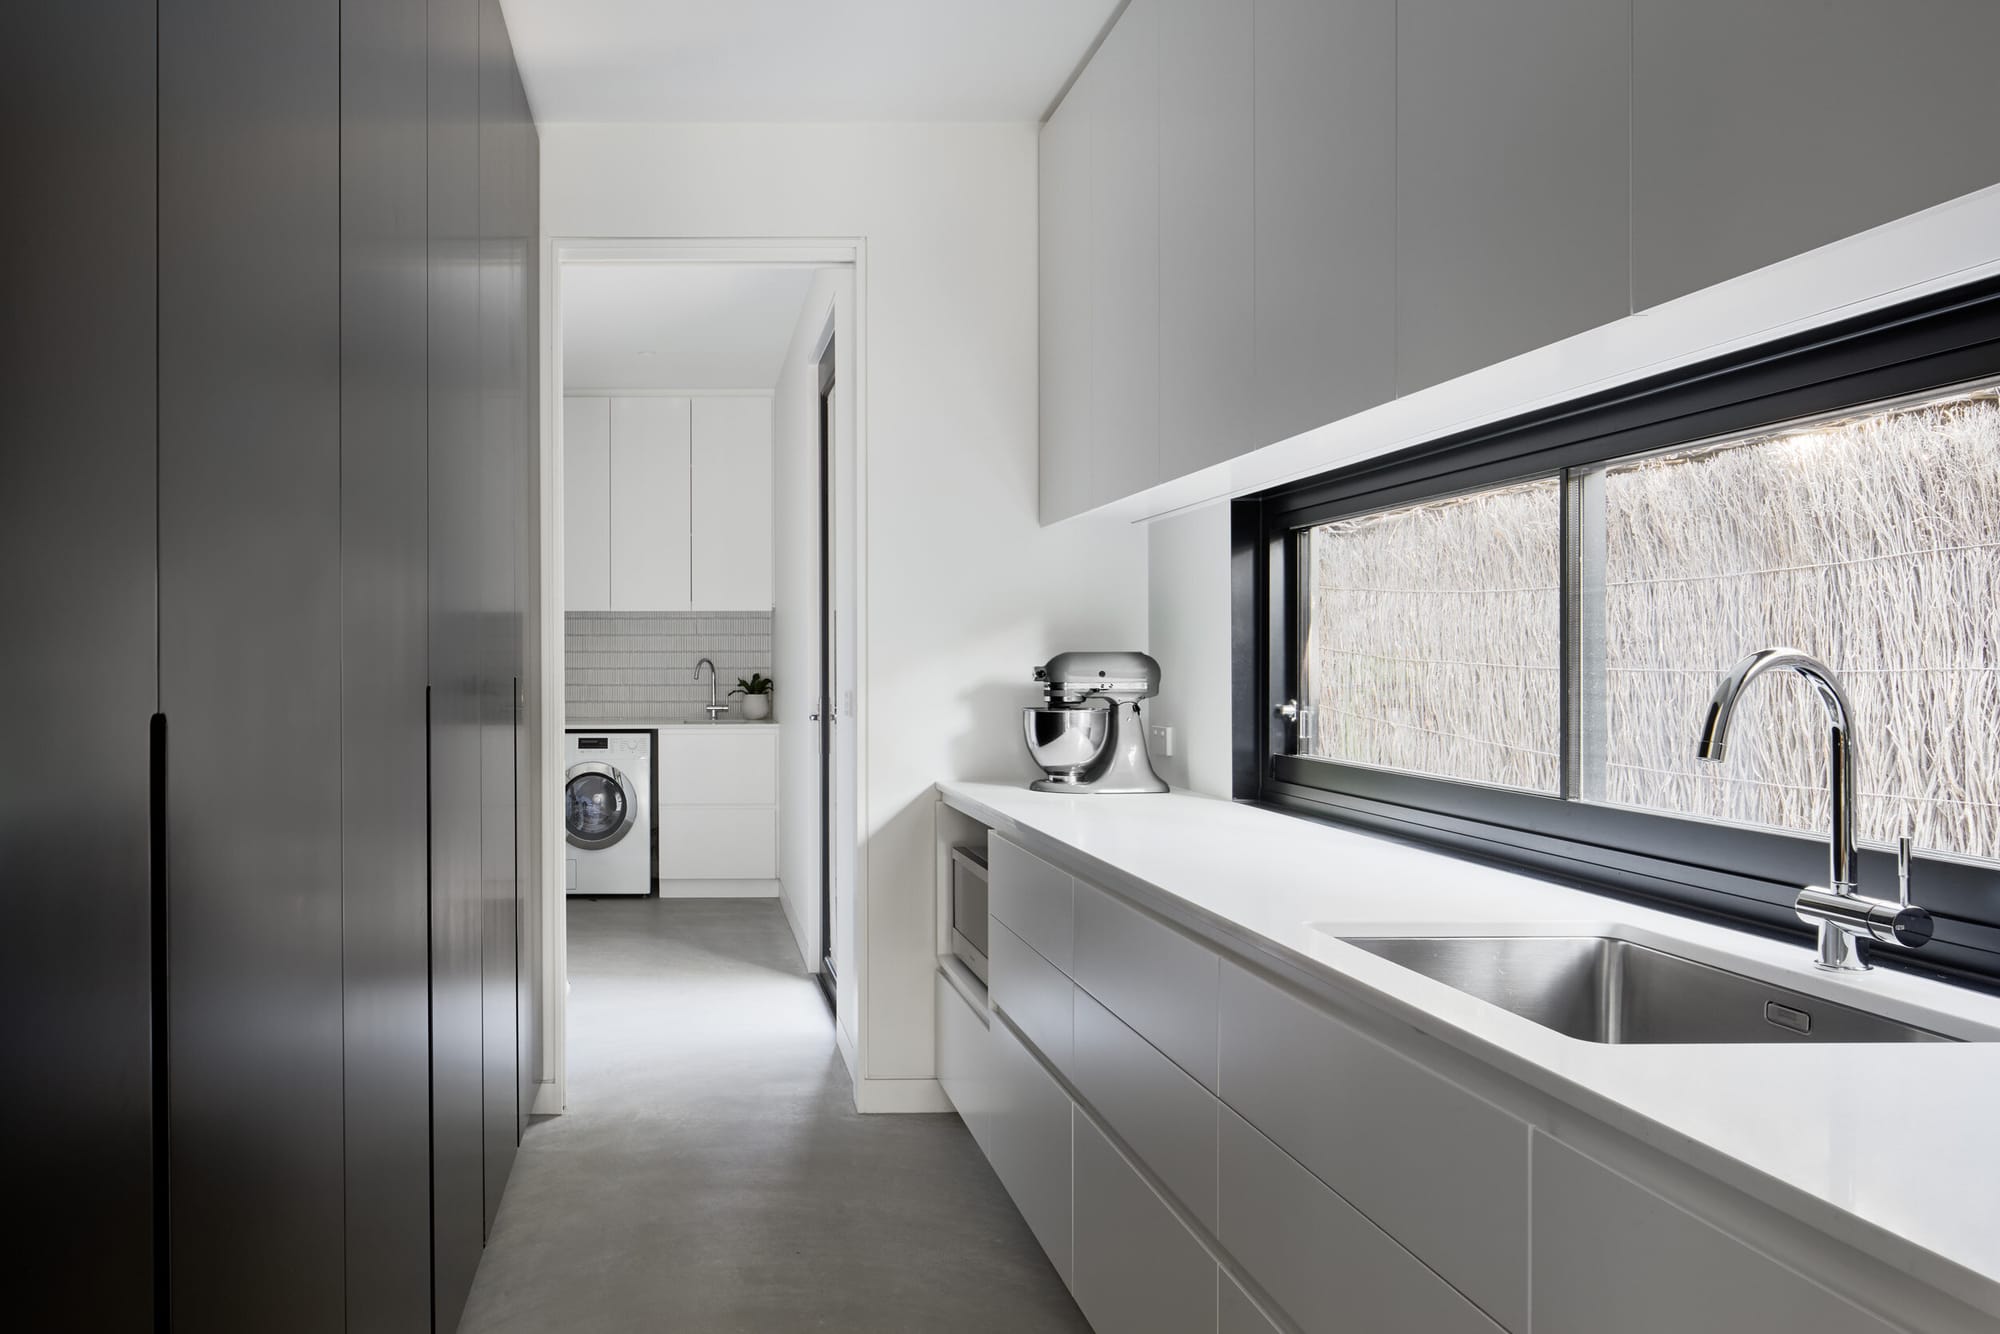 Laurel Grove by Kirsten Johnstone Architecture. Photography by Tatjana Plitt. Scullery space with white and black counters and storage. Polished concrete floors.